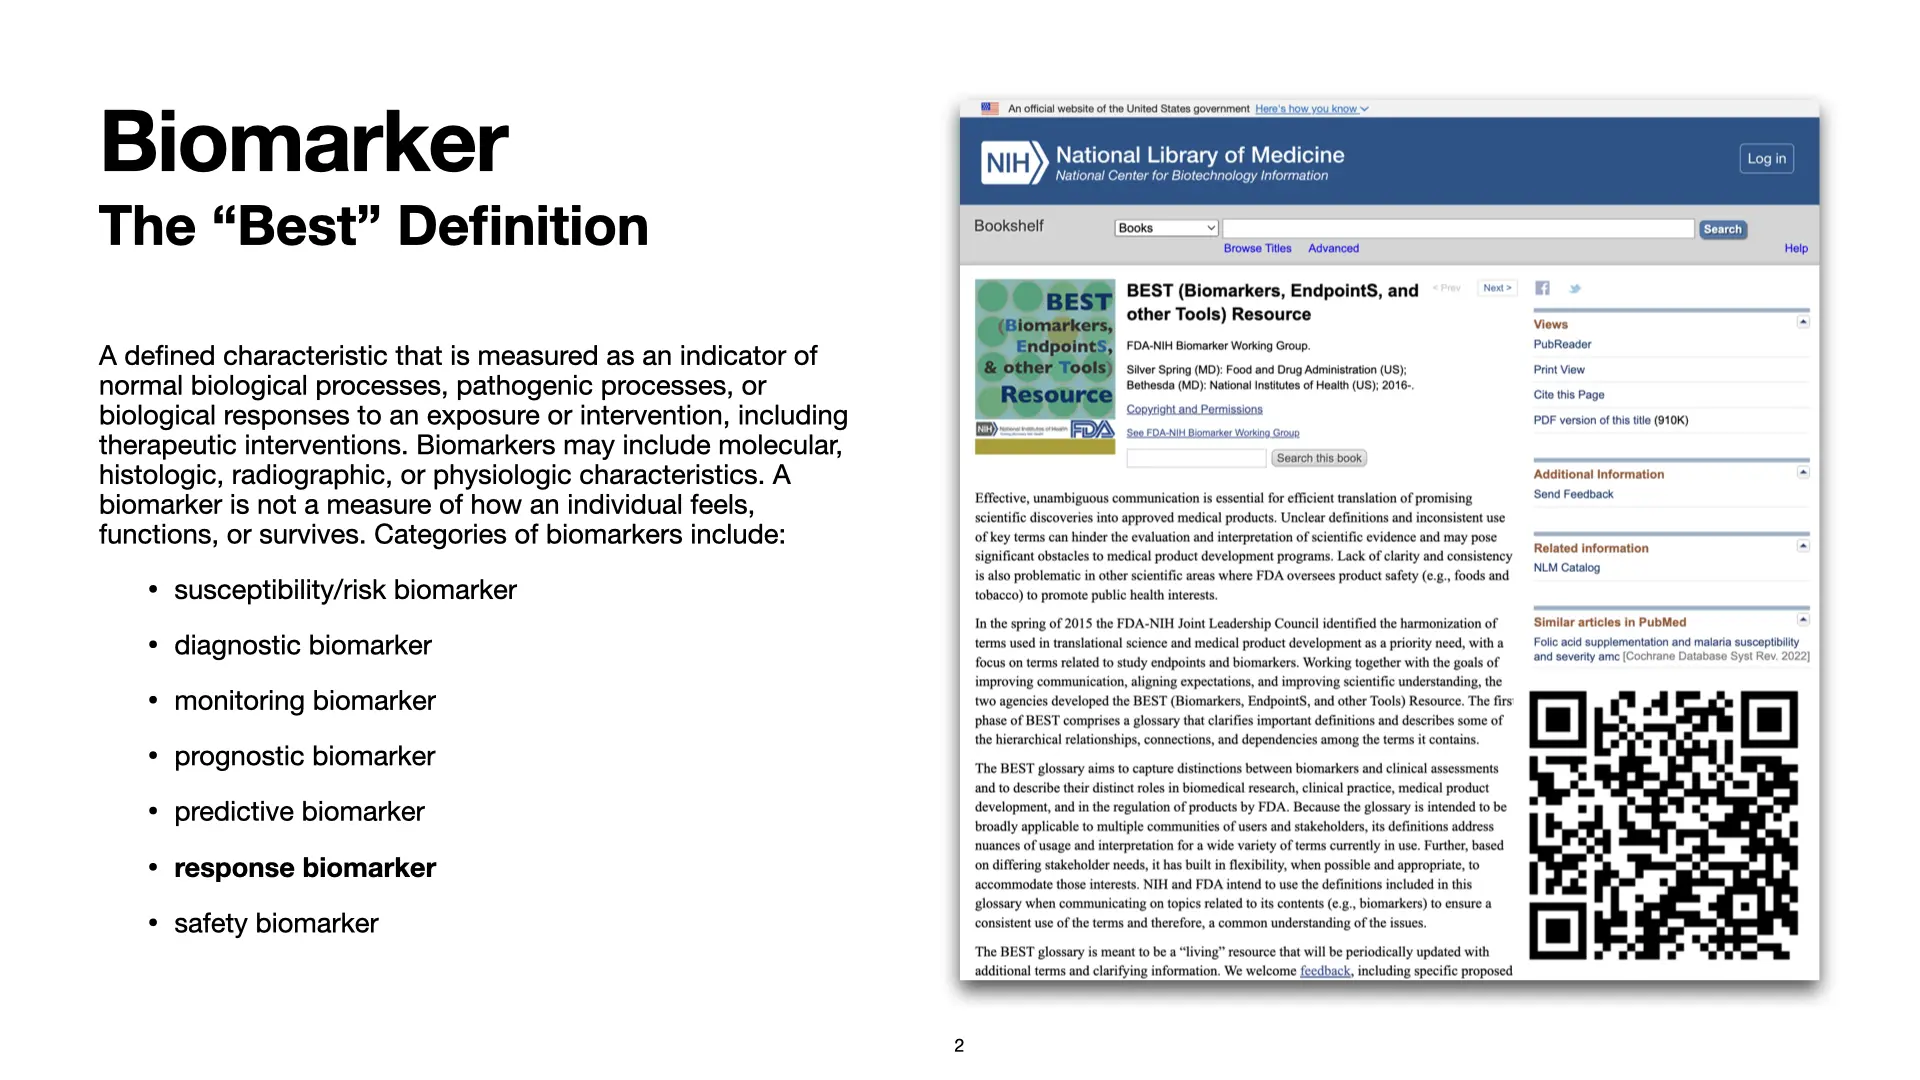 Slide 2: Biomarker: The 'Best' Definition. A defined characteristic that is measured as an indicator of normal biological processes, pathogenic processes, or biological responses to an exposure or intervention, including therapeutic interventions. Biomarkers may include molecular, histologic, radiographic, or physiologic characteristics. A biomarker is not a measure of how an individual feels, functions, or survives. Categories of biomarkers include: susceptibility/risk biomarker, diagnostic biomarker, monitoring biomarker, prognostic biomarker, predictive biomarker, response biomarker, and safety biomarker. Source: BEST Resource.